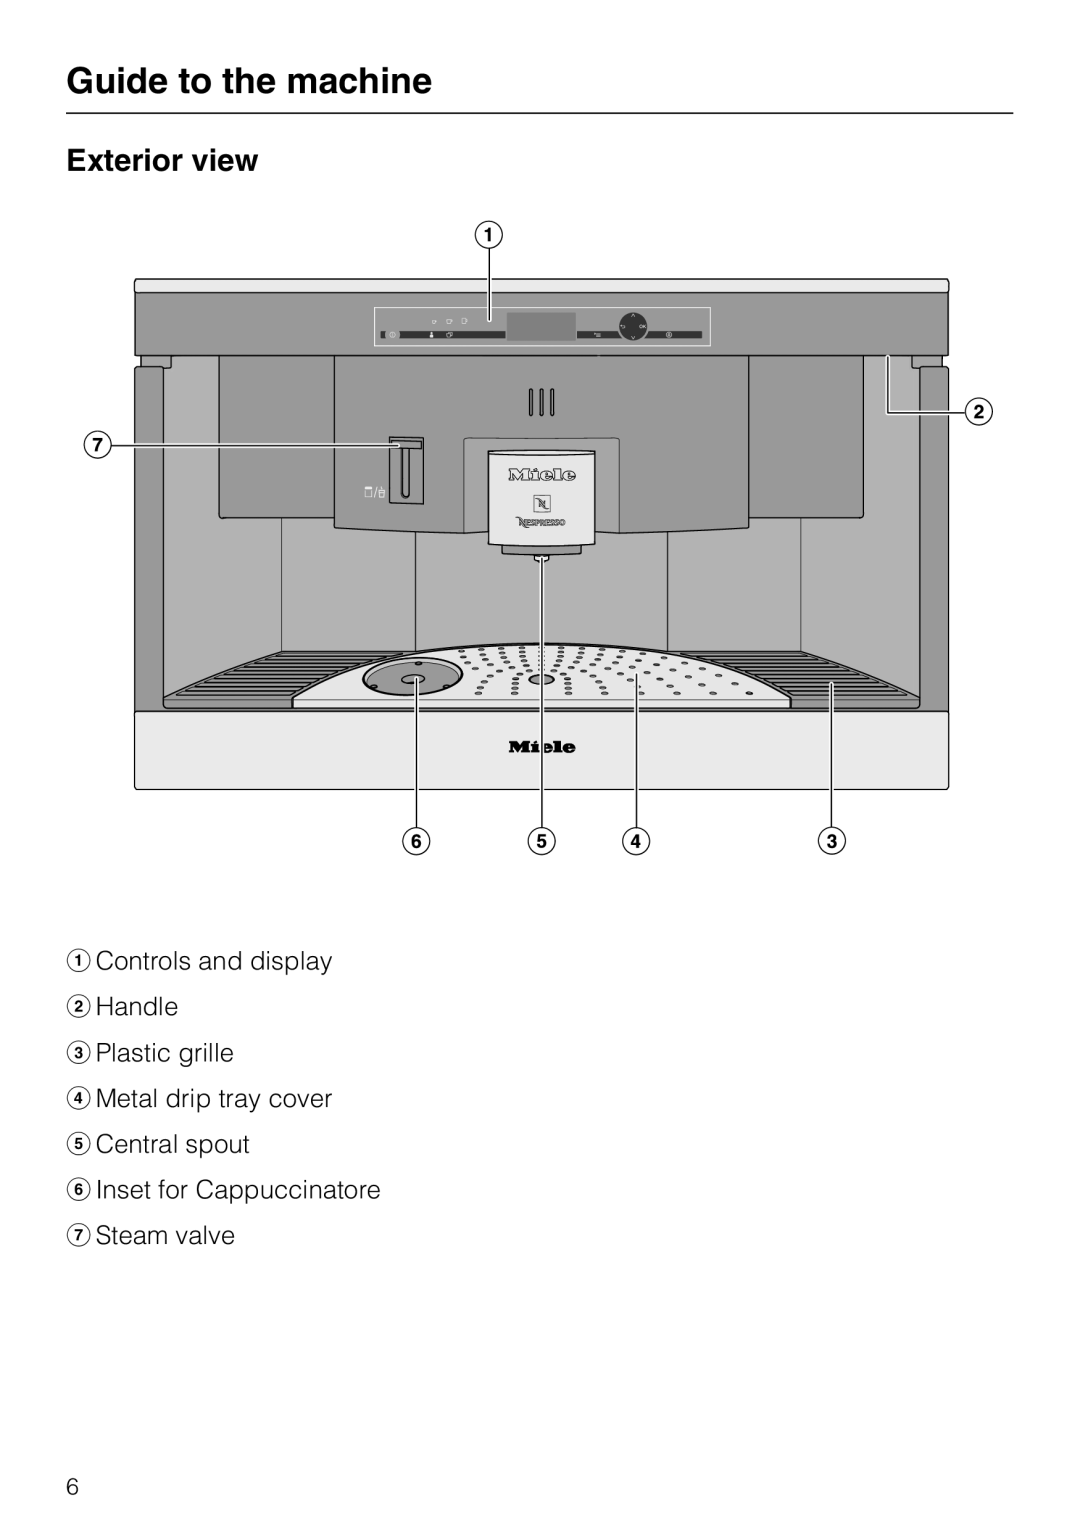 Miele CVA 6431 (C) installation instructions Guide to the machine, Exterior view 